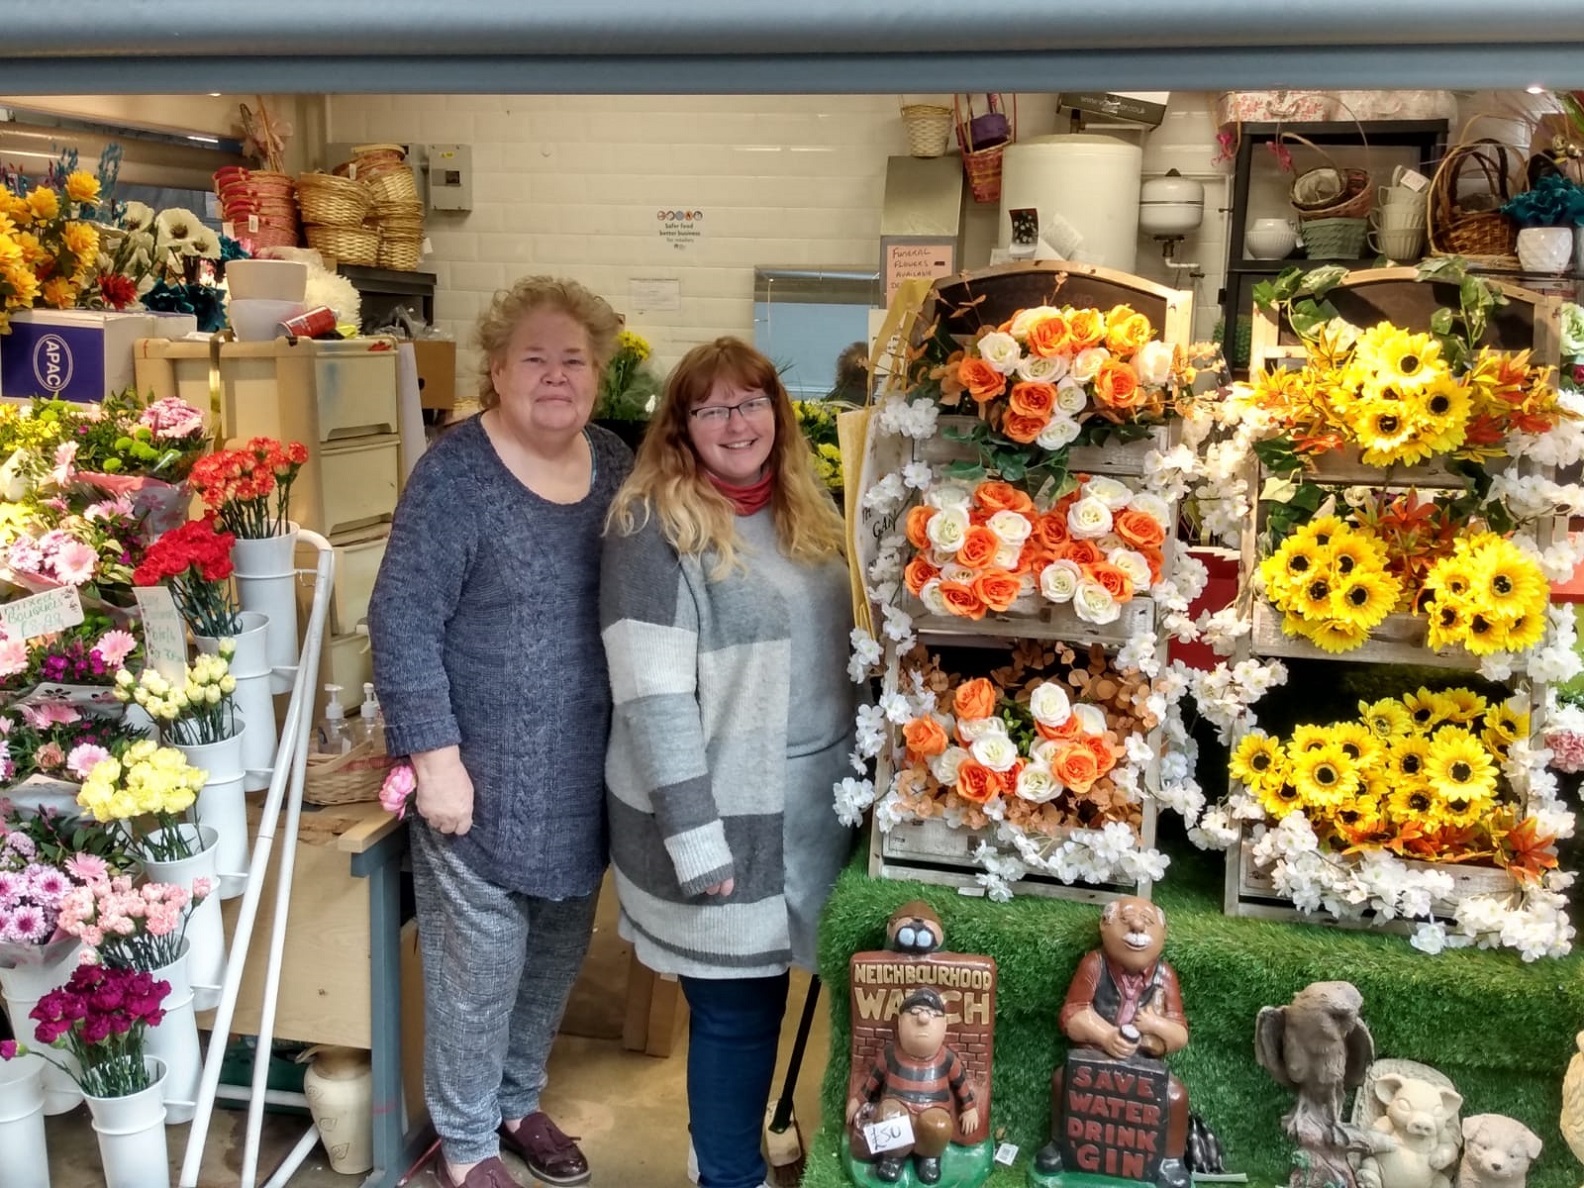 Chris Green and Bethan Smith (right) from The Market Garden in Pontypool Indoor Market.